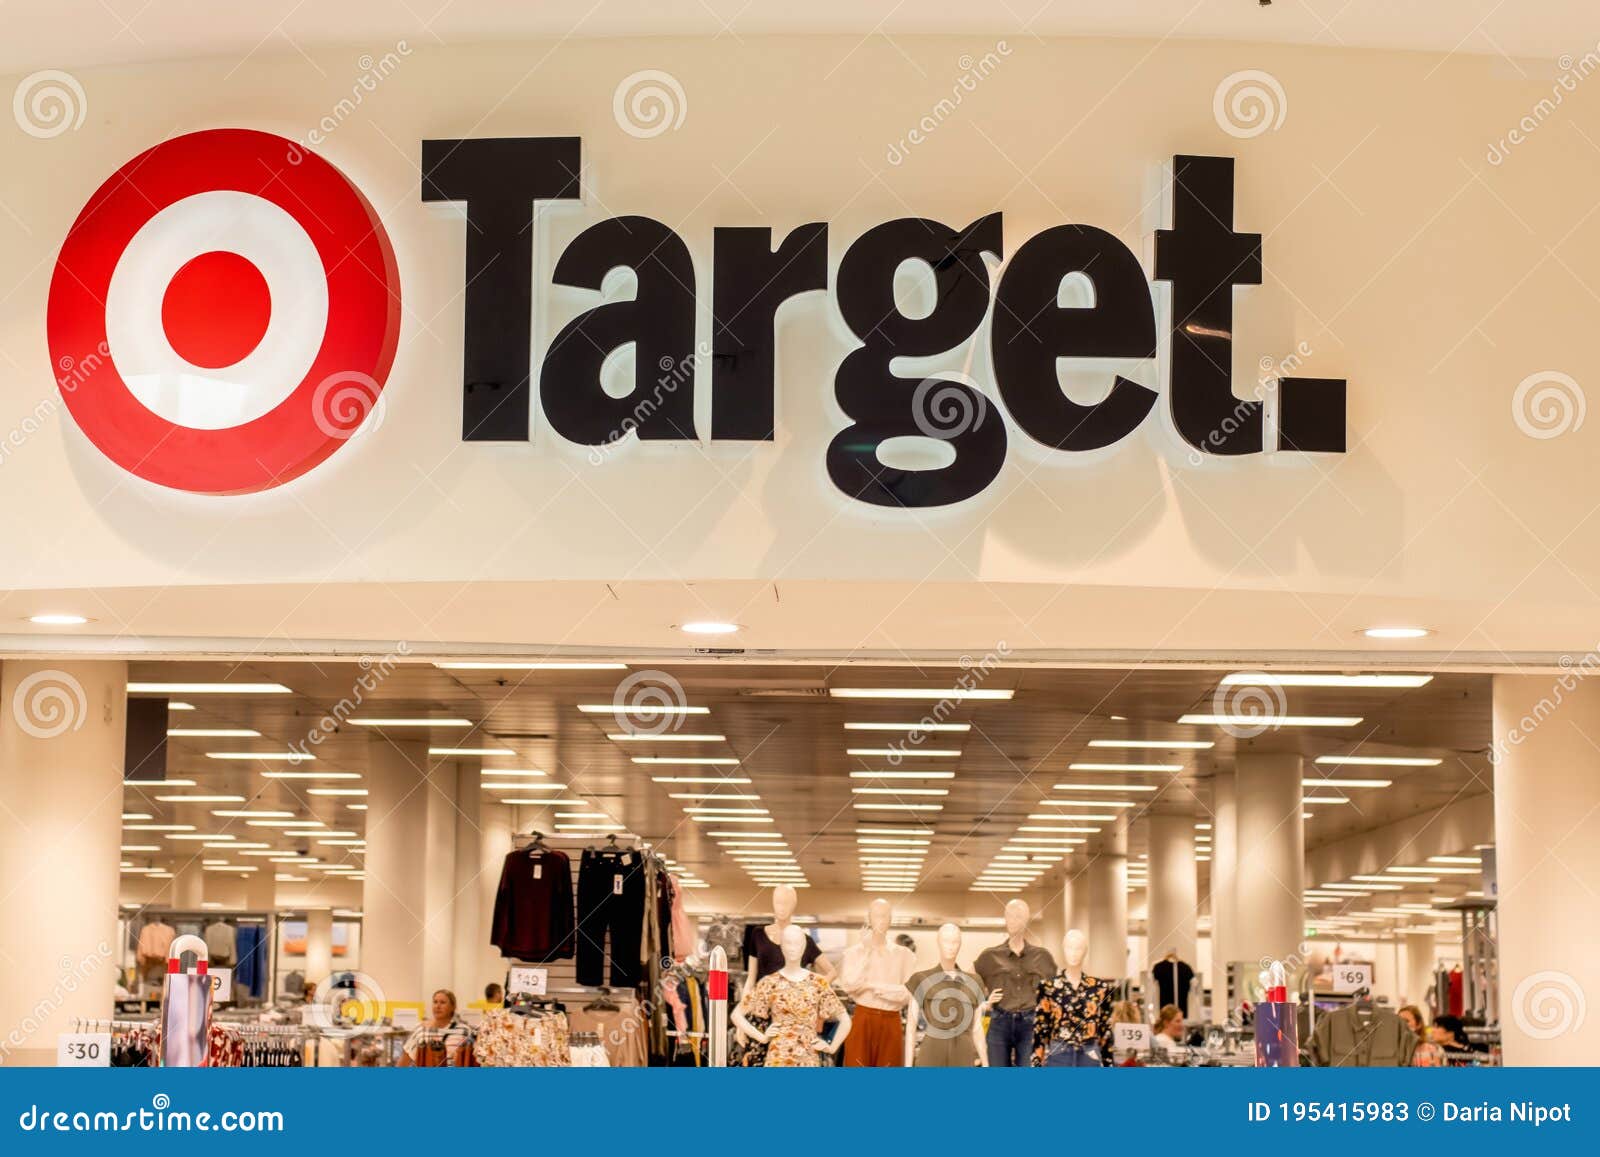 https://thumbs.dreamstime.com/z/sydney-australia-entrance-to-target-retail-store-target-australia-mid-price-department-store-chain-owned-wesfarmers-sydney-195415983.jpg